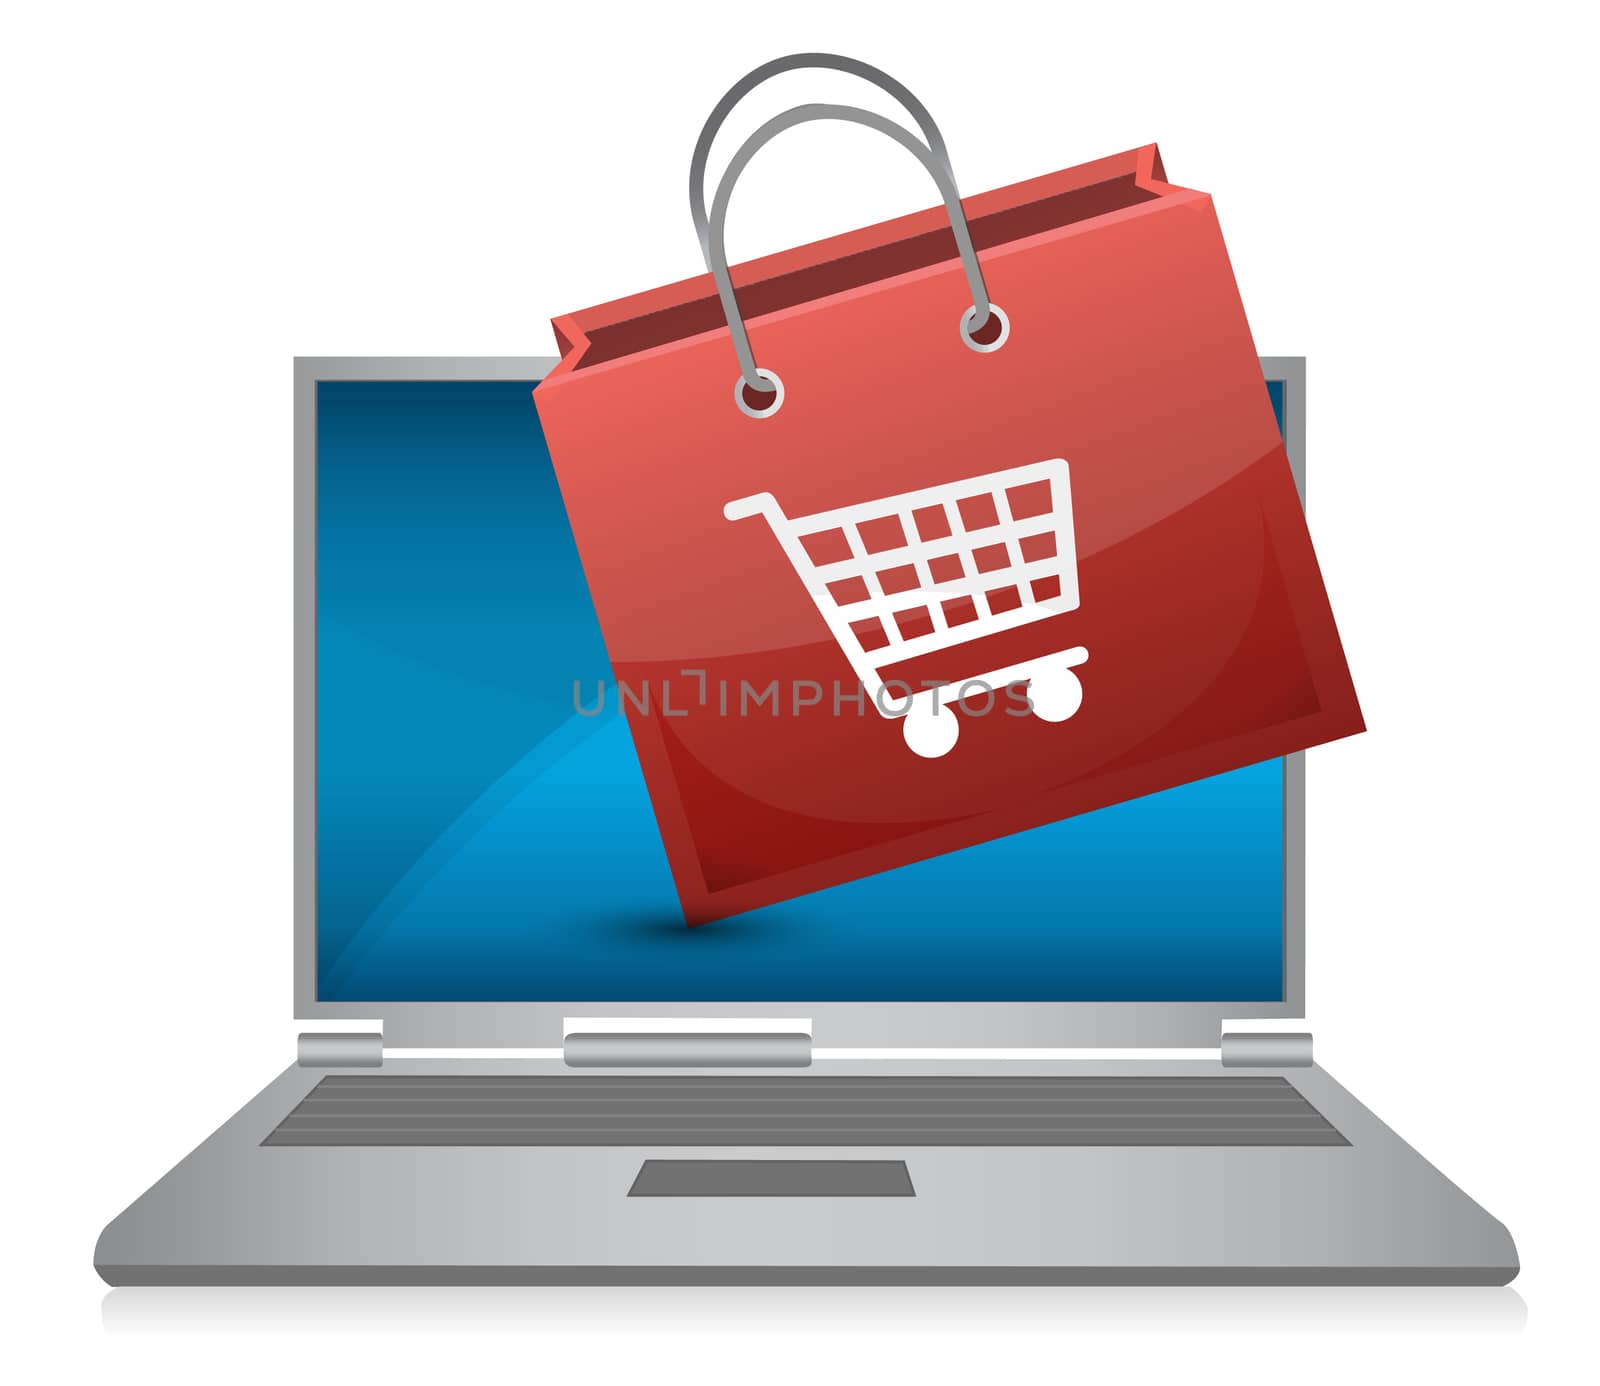 Shopping bag icon coming out of laptop screen by alexmillos